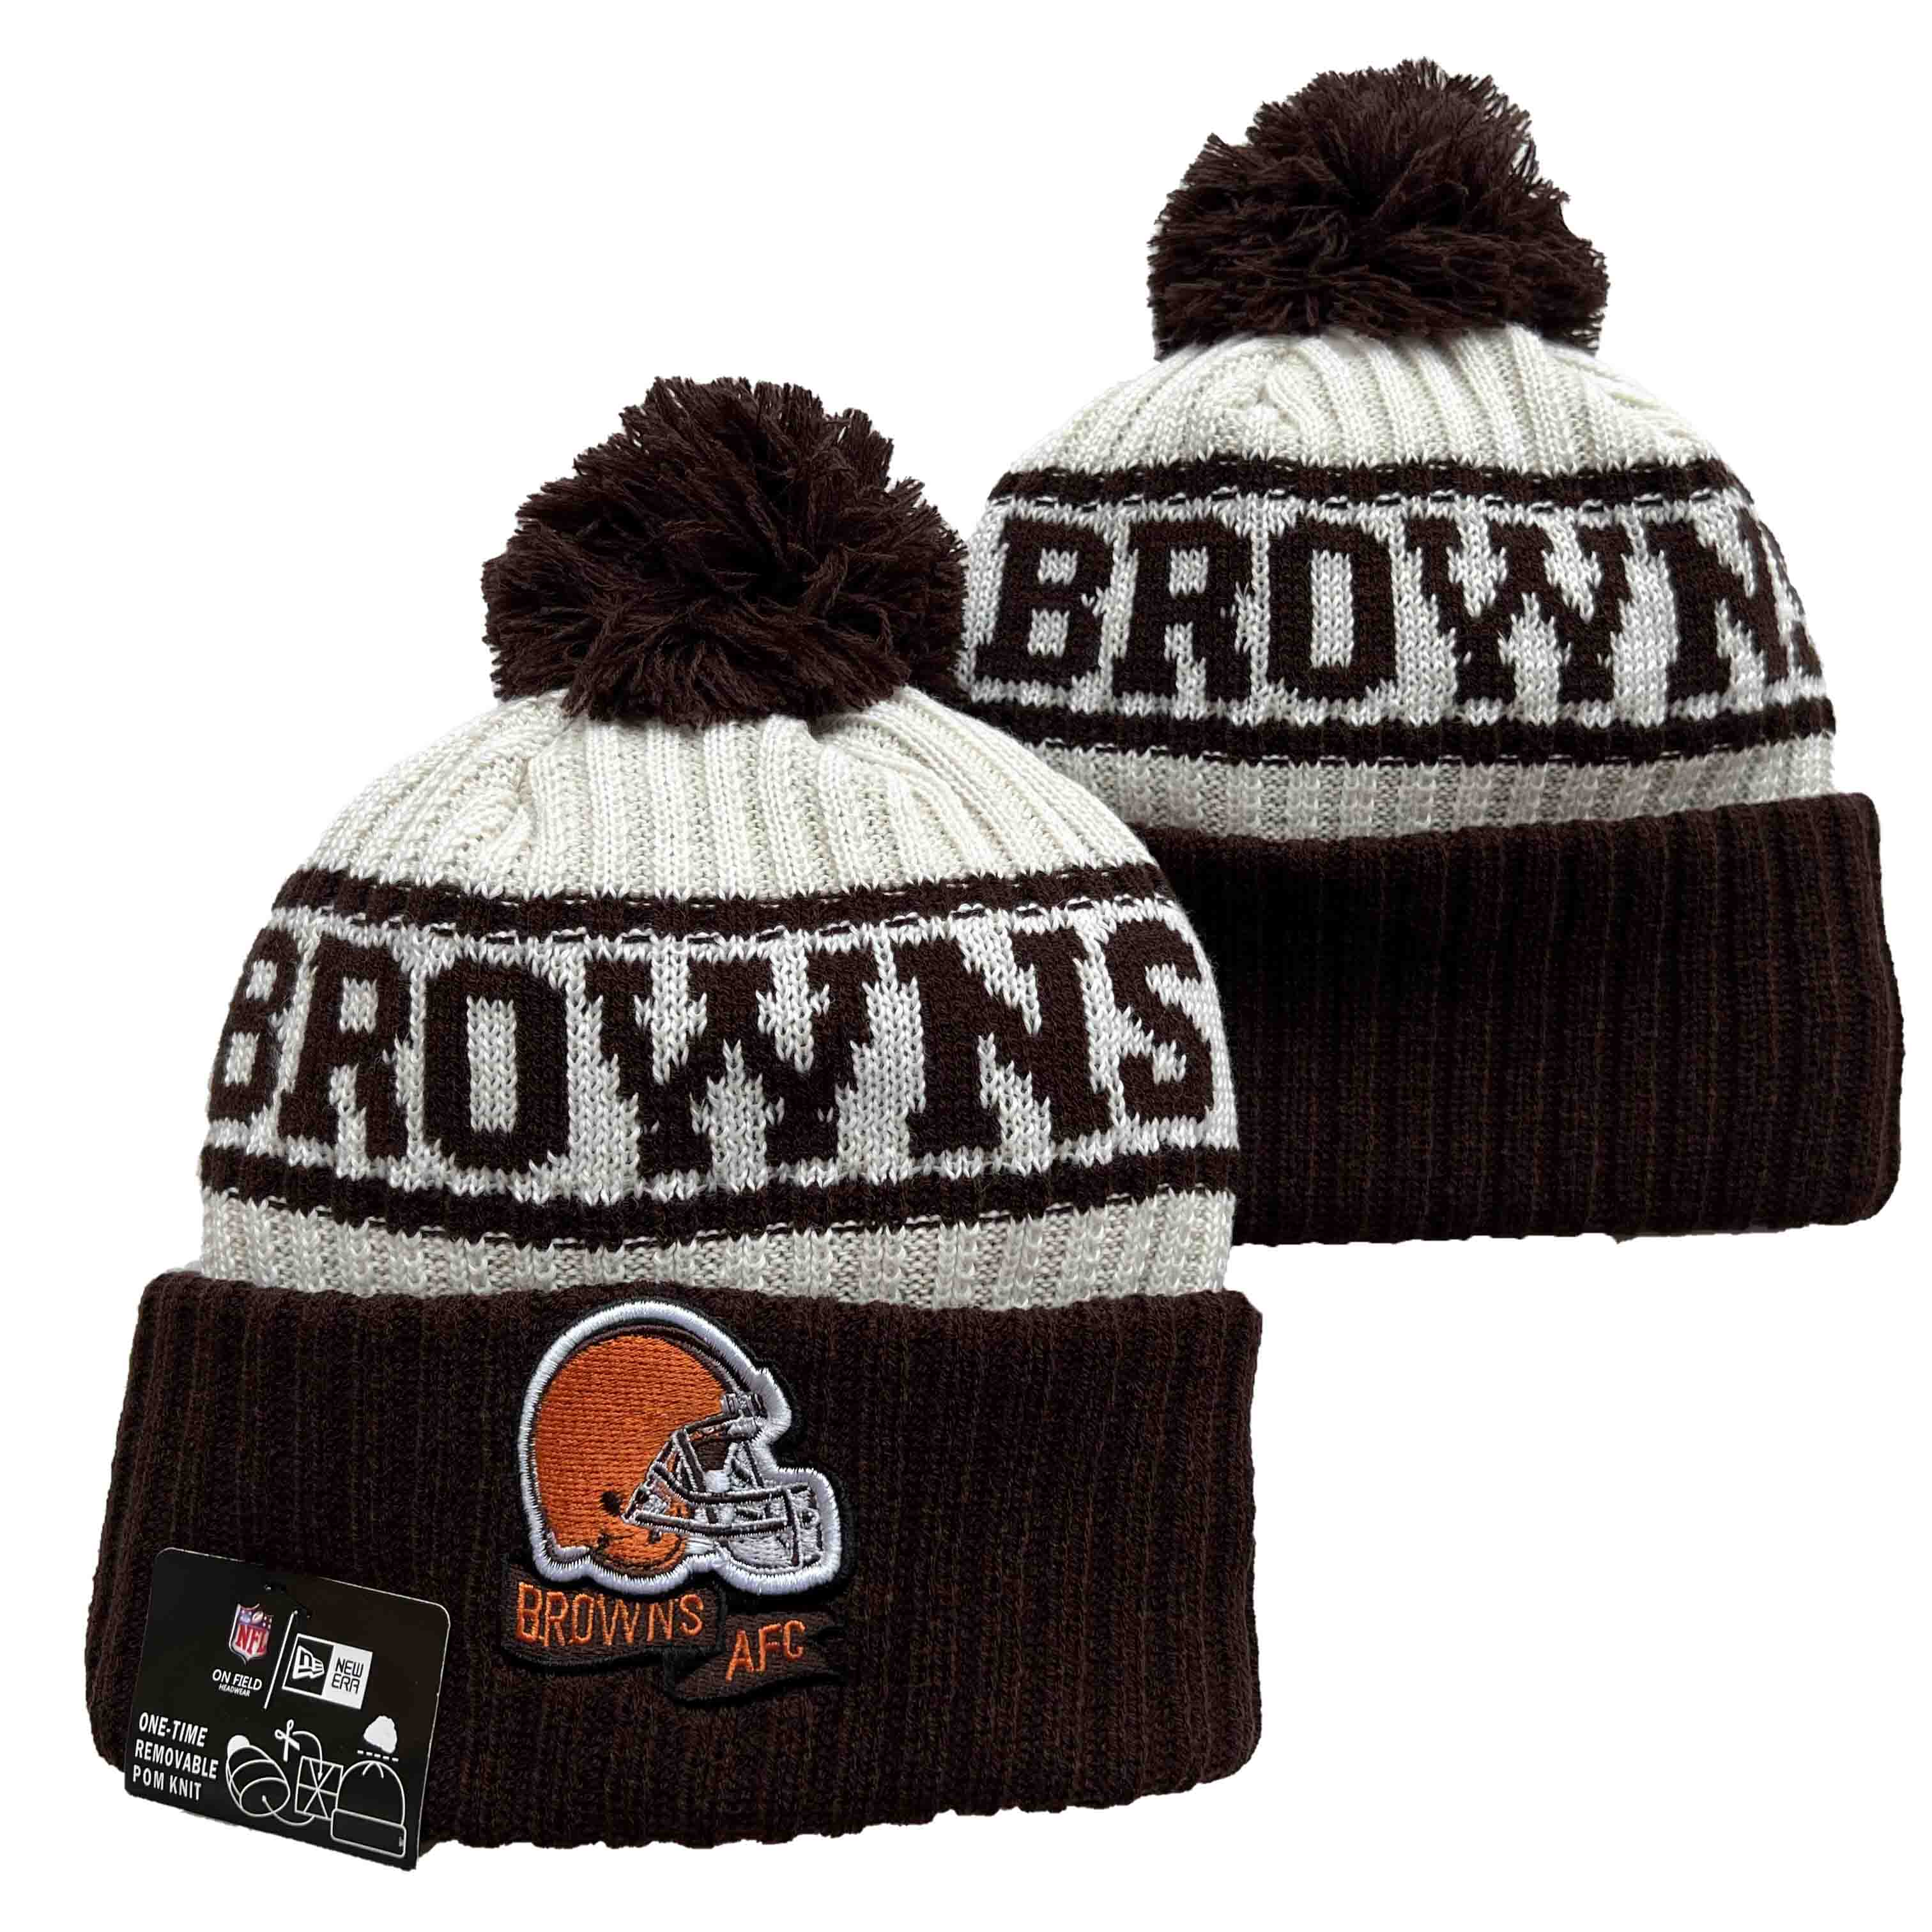 NFL Cleveland Browns Beanies Knit Hats-YD1303